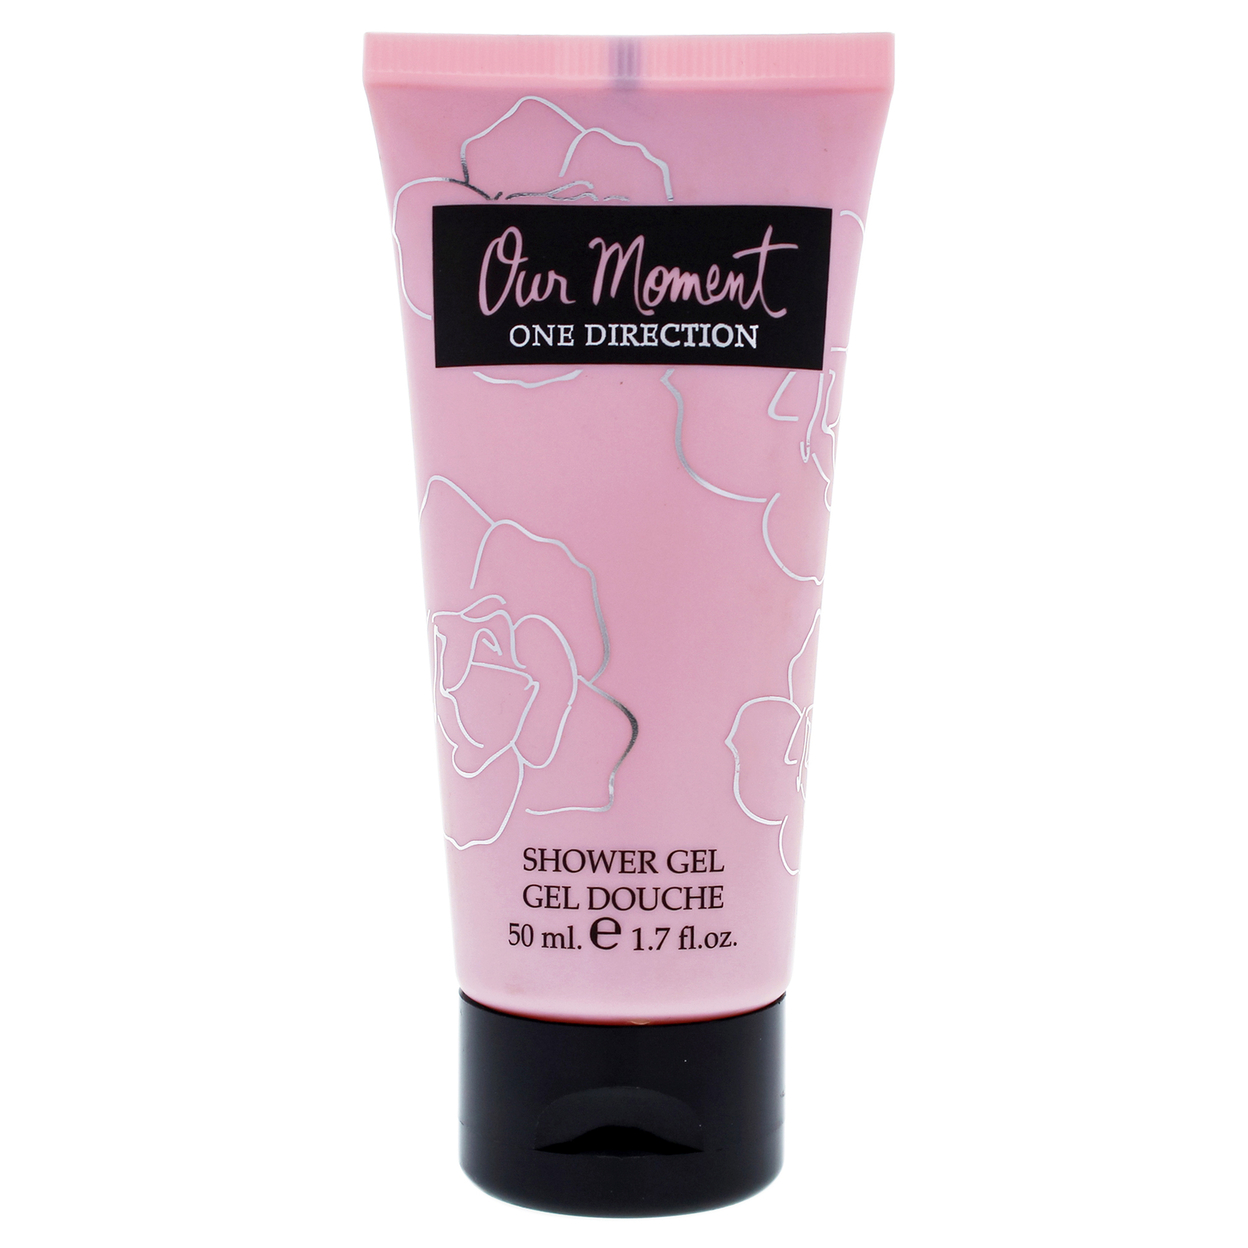 One Direction Our Moment Shower Gel 1.7 Oz